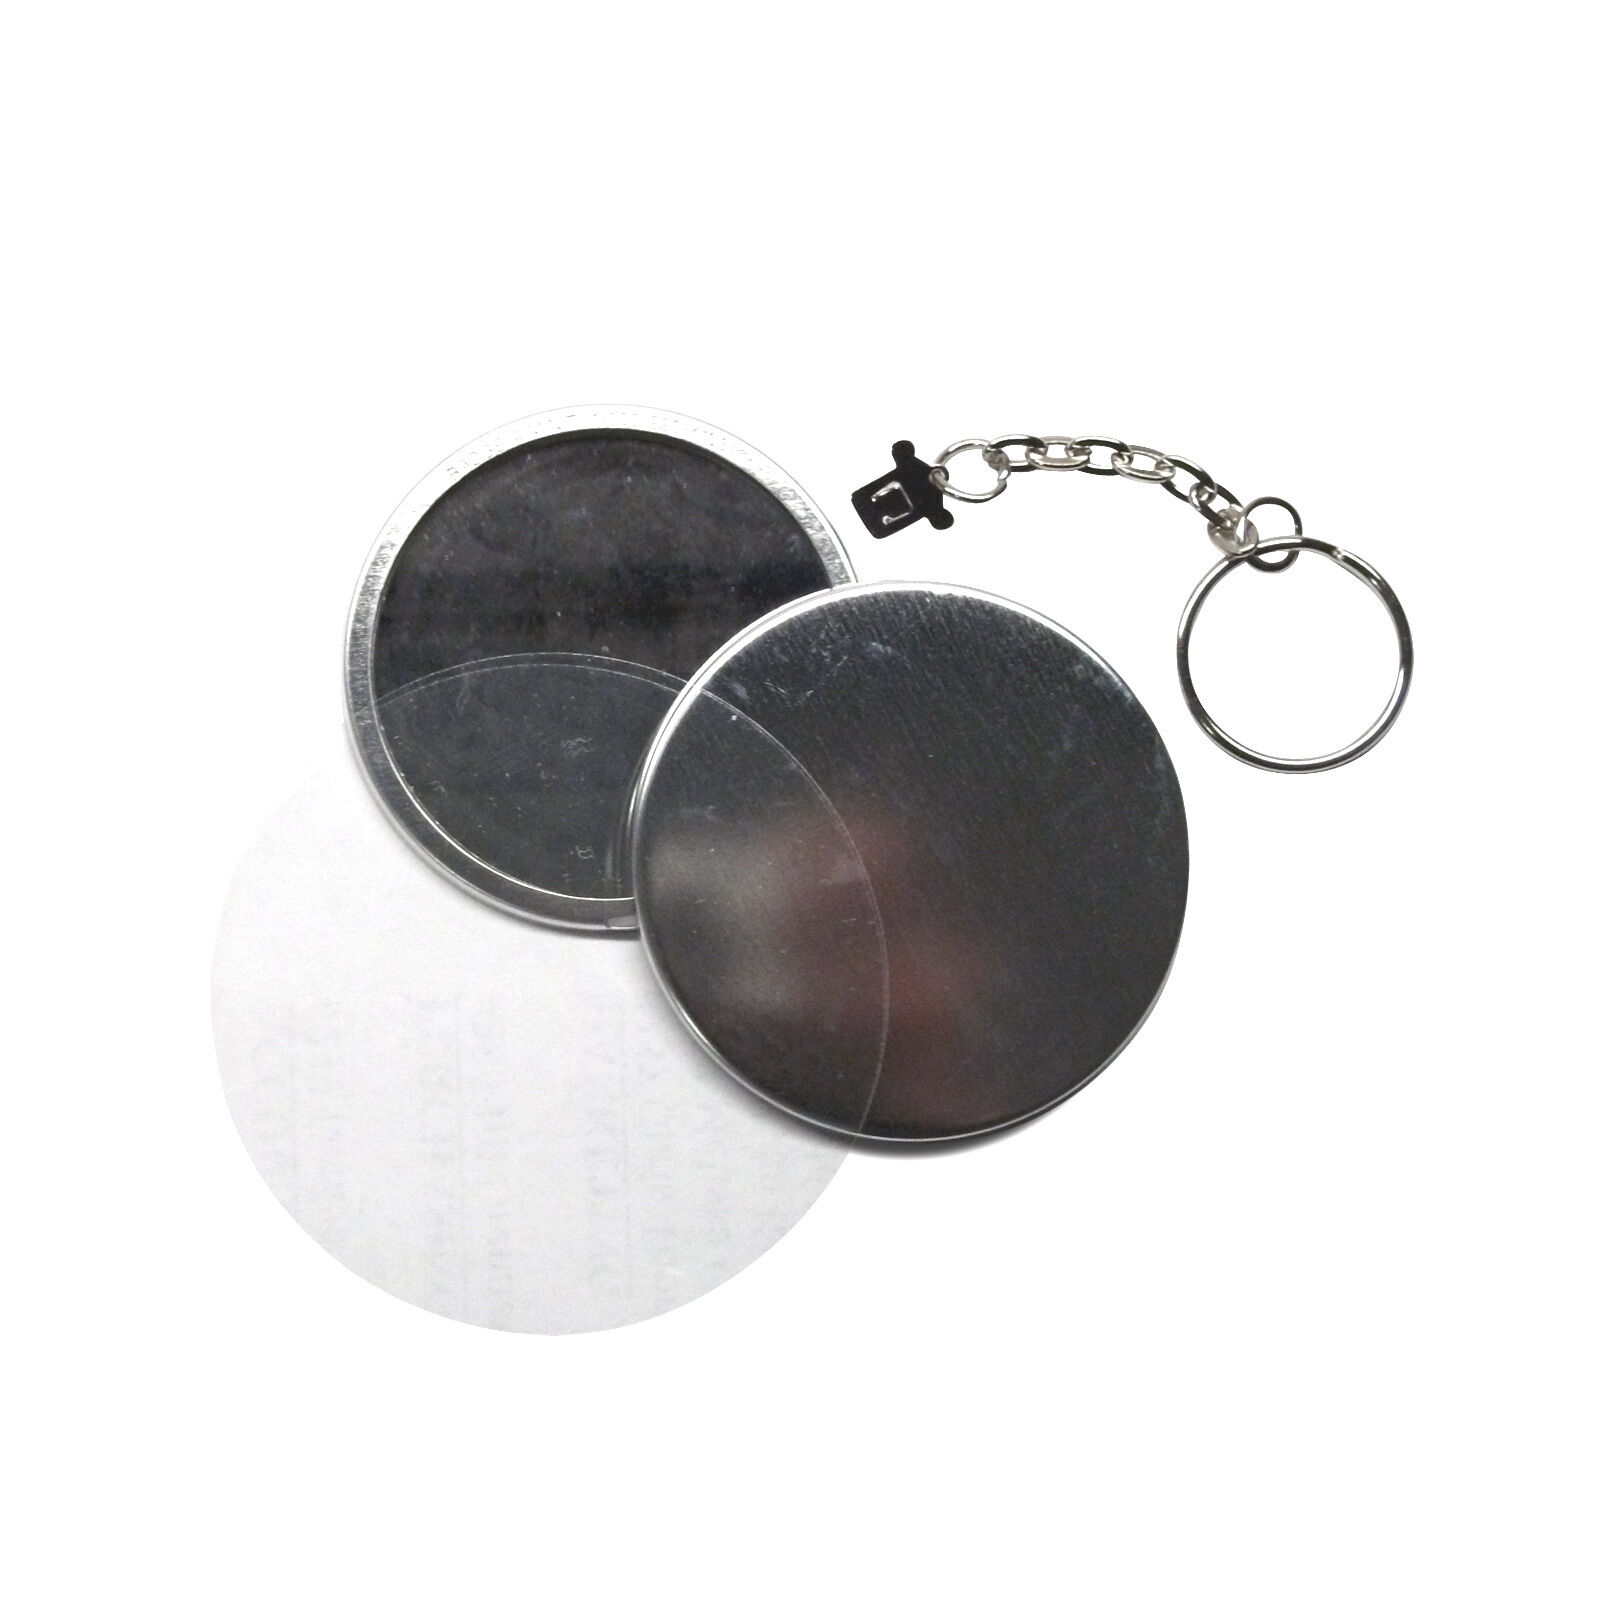 Badge-A-Minit 100-2 1/4" MirrorBack Key Chain Buttons #4500